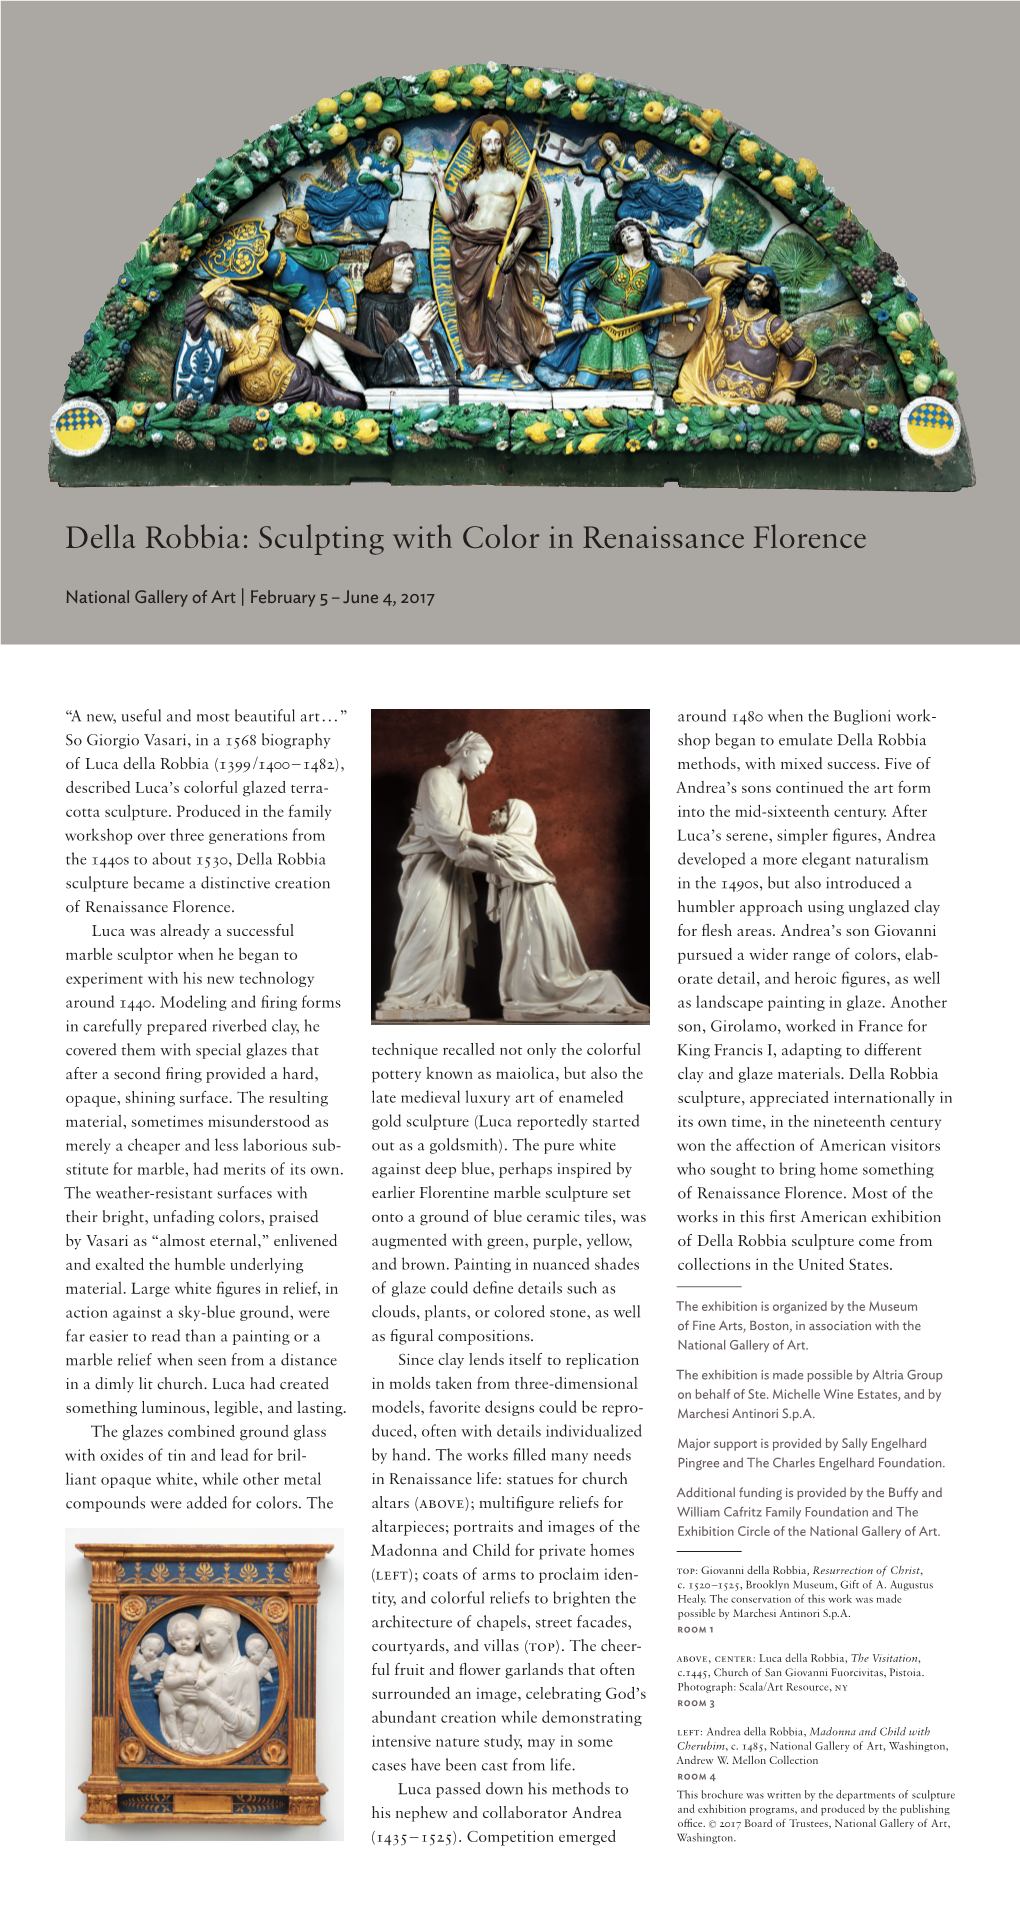 Della Robbia: Sculpting with Color in Renaissance Florence